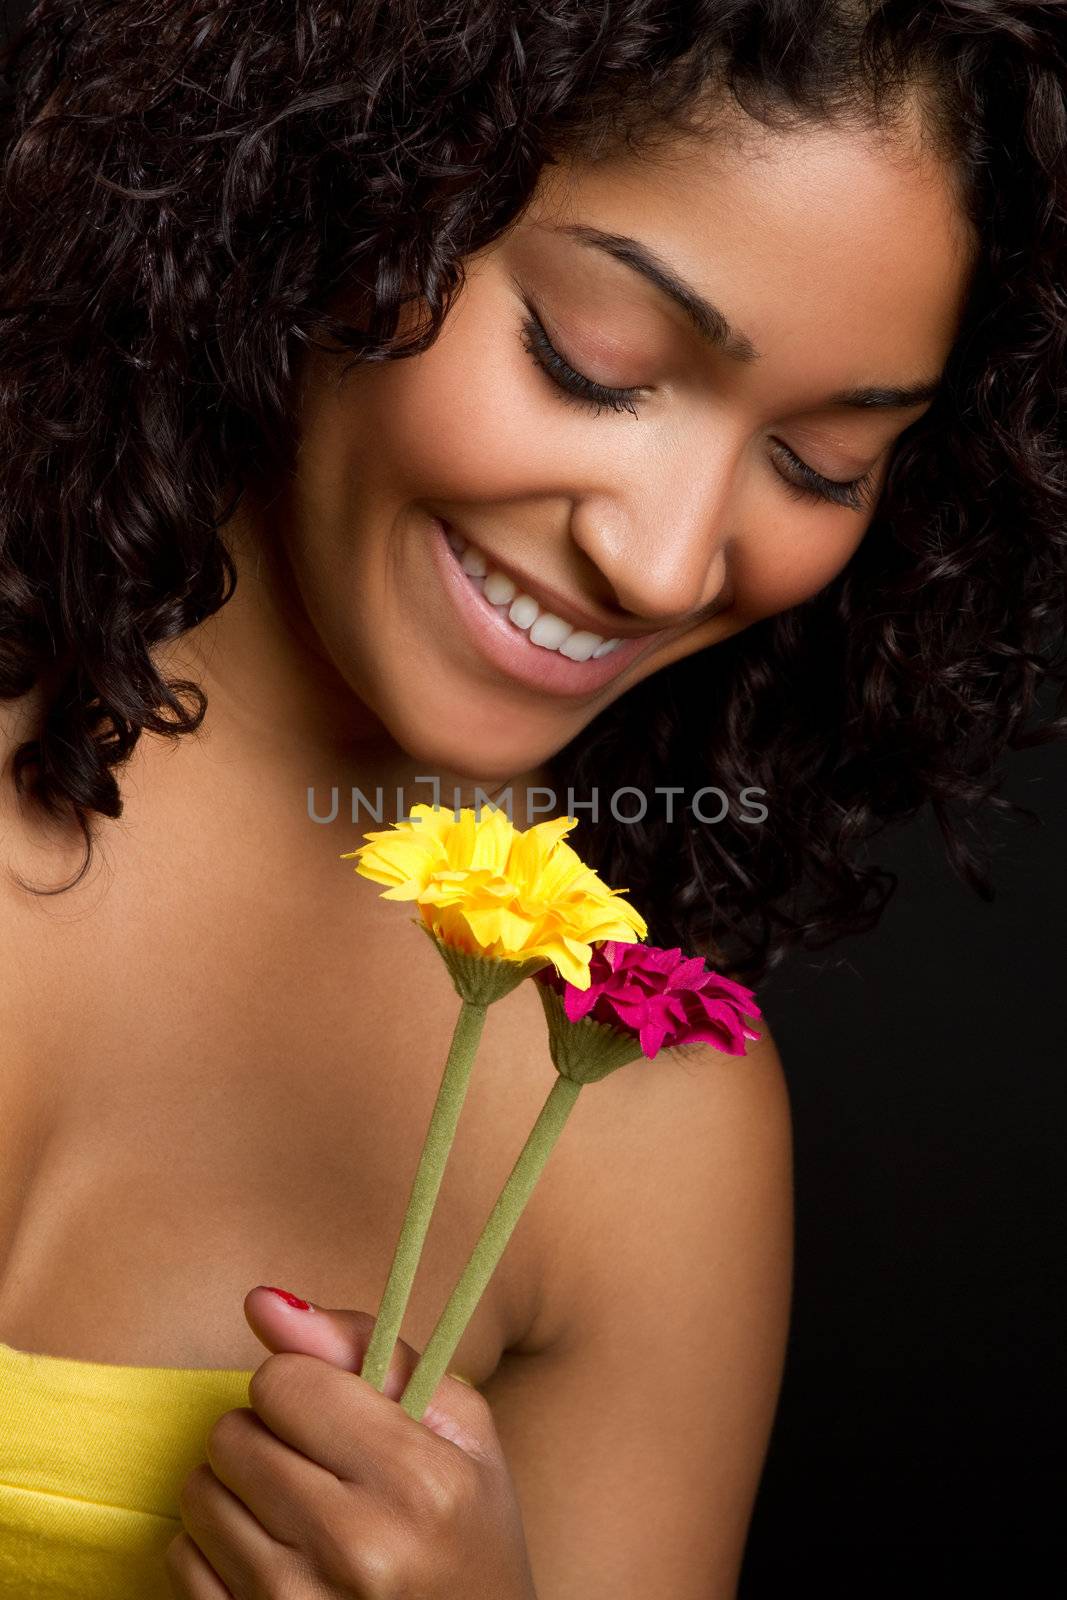 Woman Holding Flowers by keeweeboy